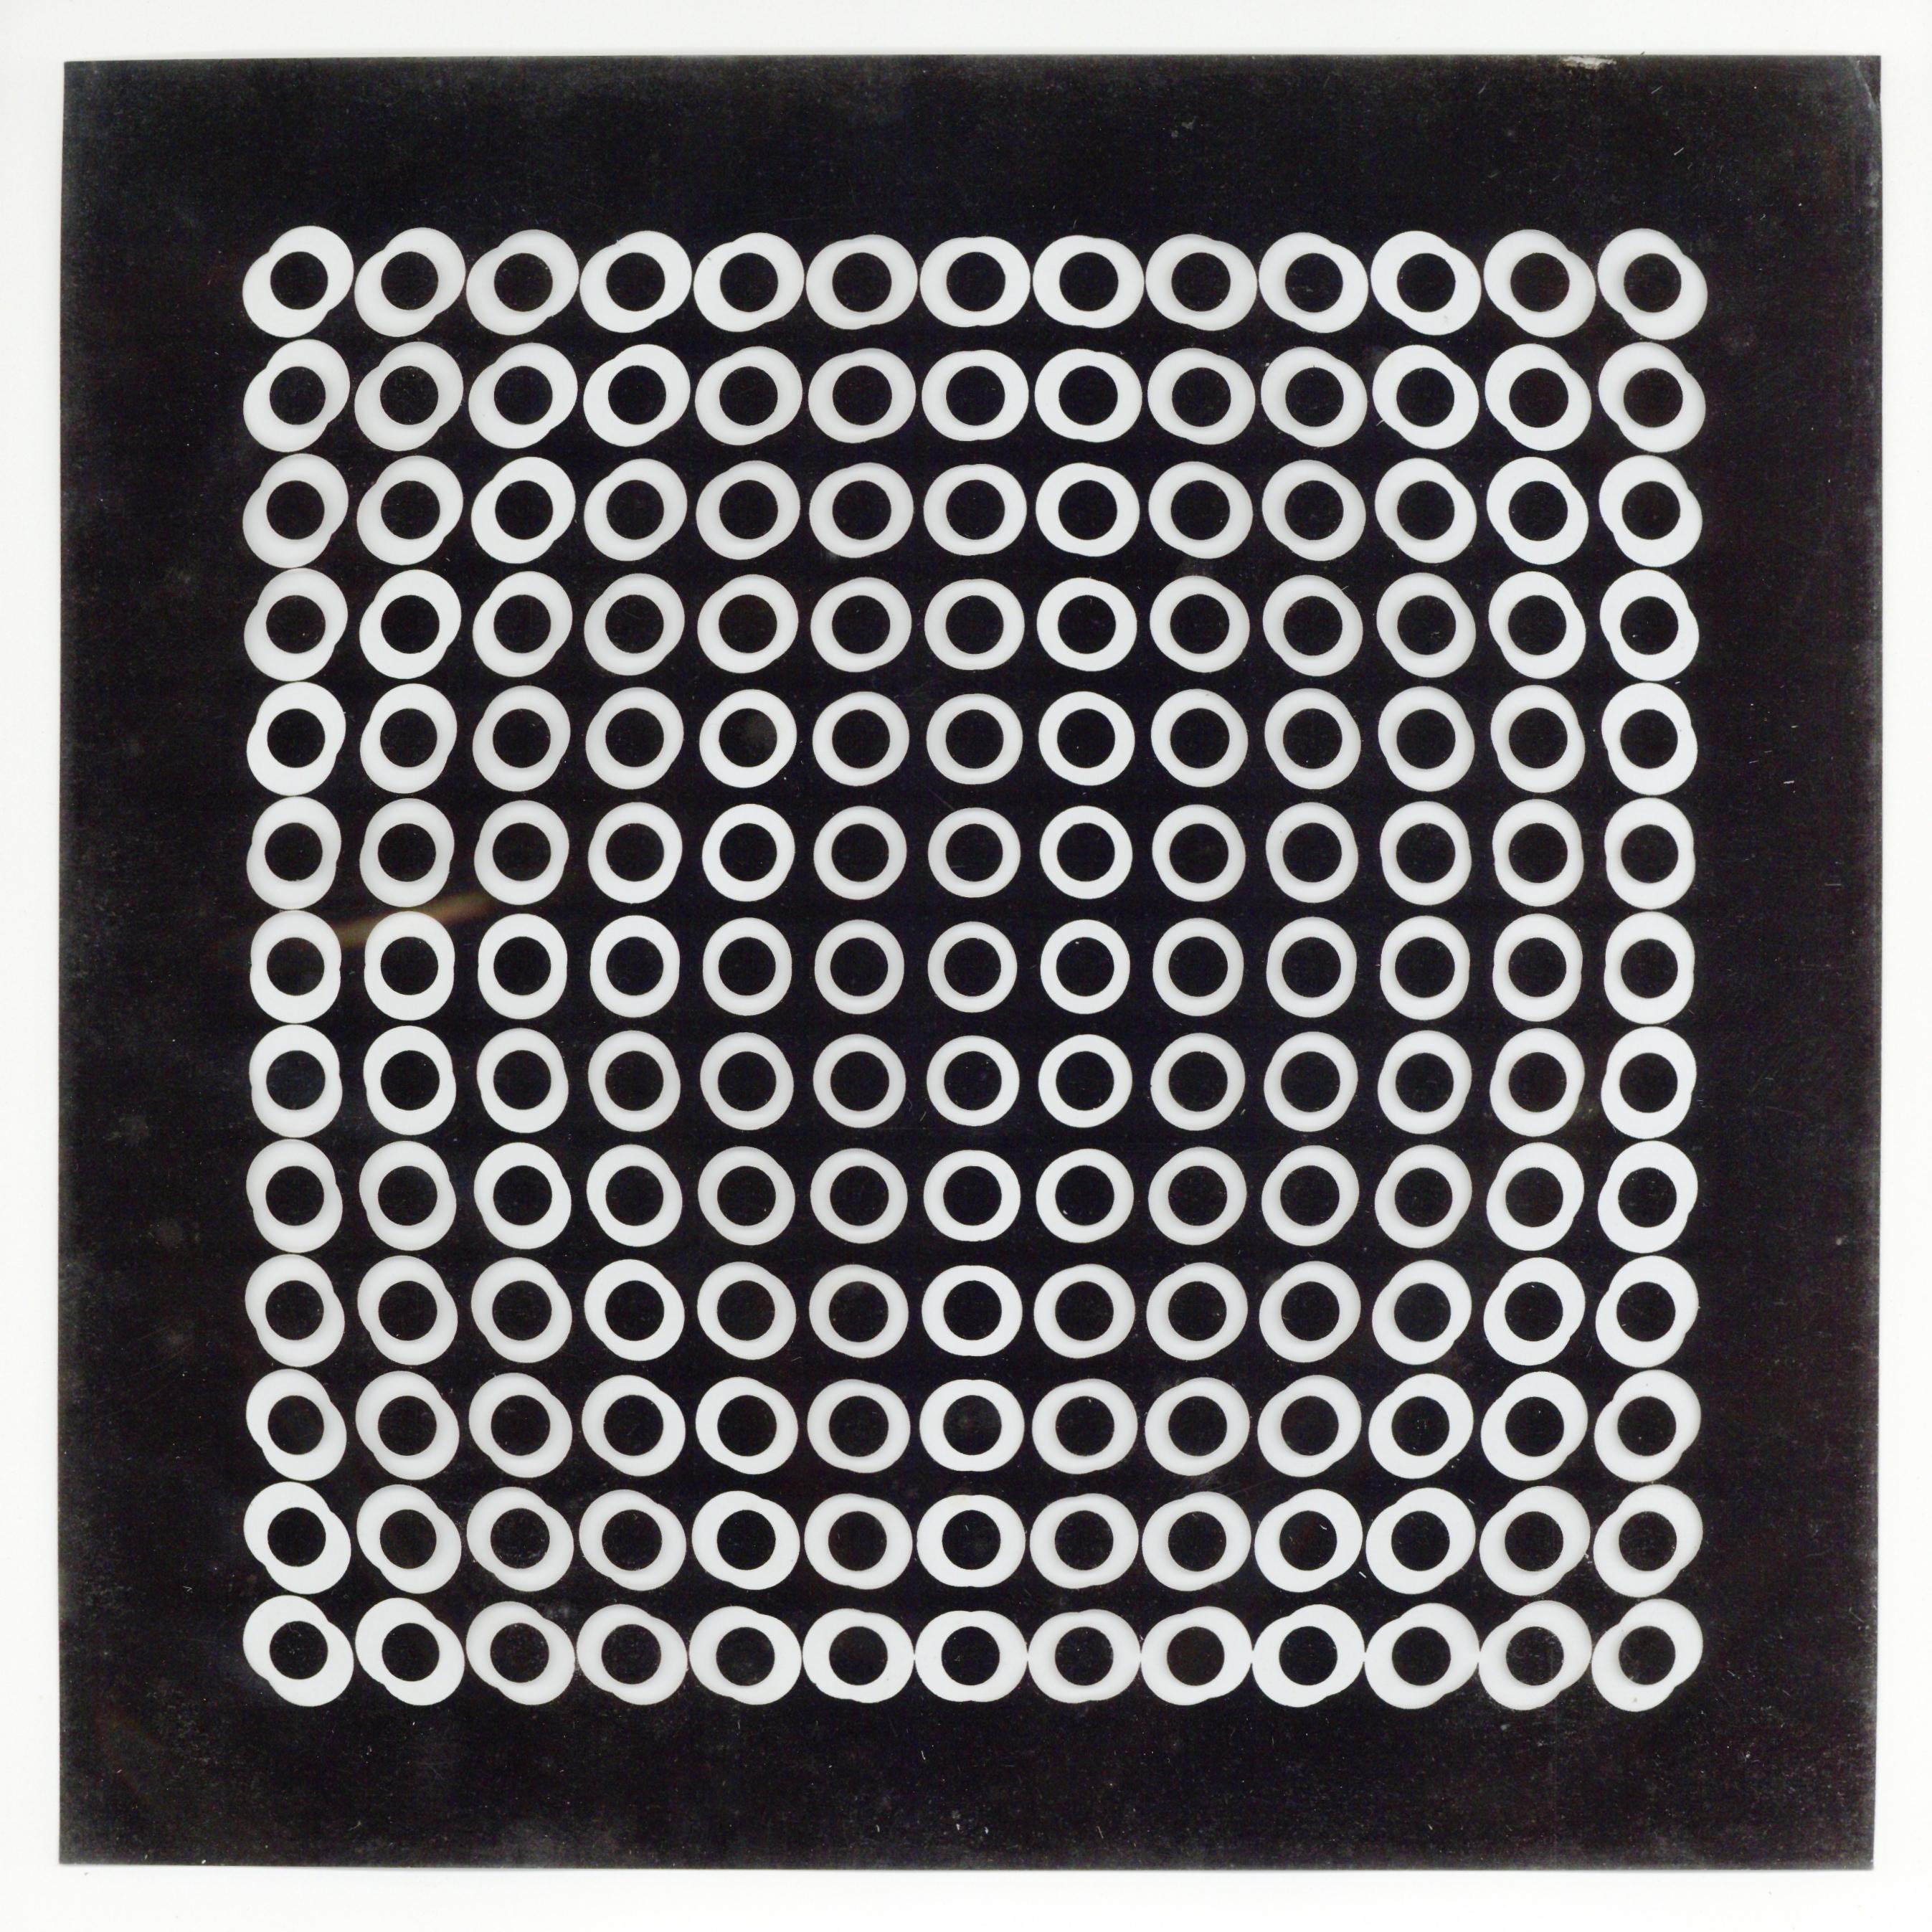 Screenprint on plastic film - Print by (After) Victor Vasarely